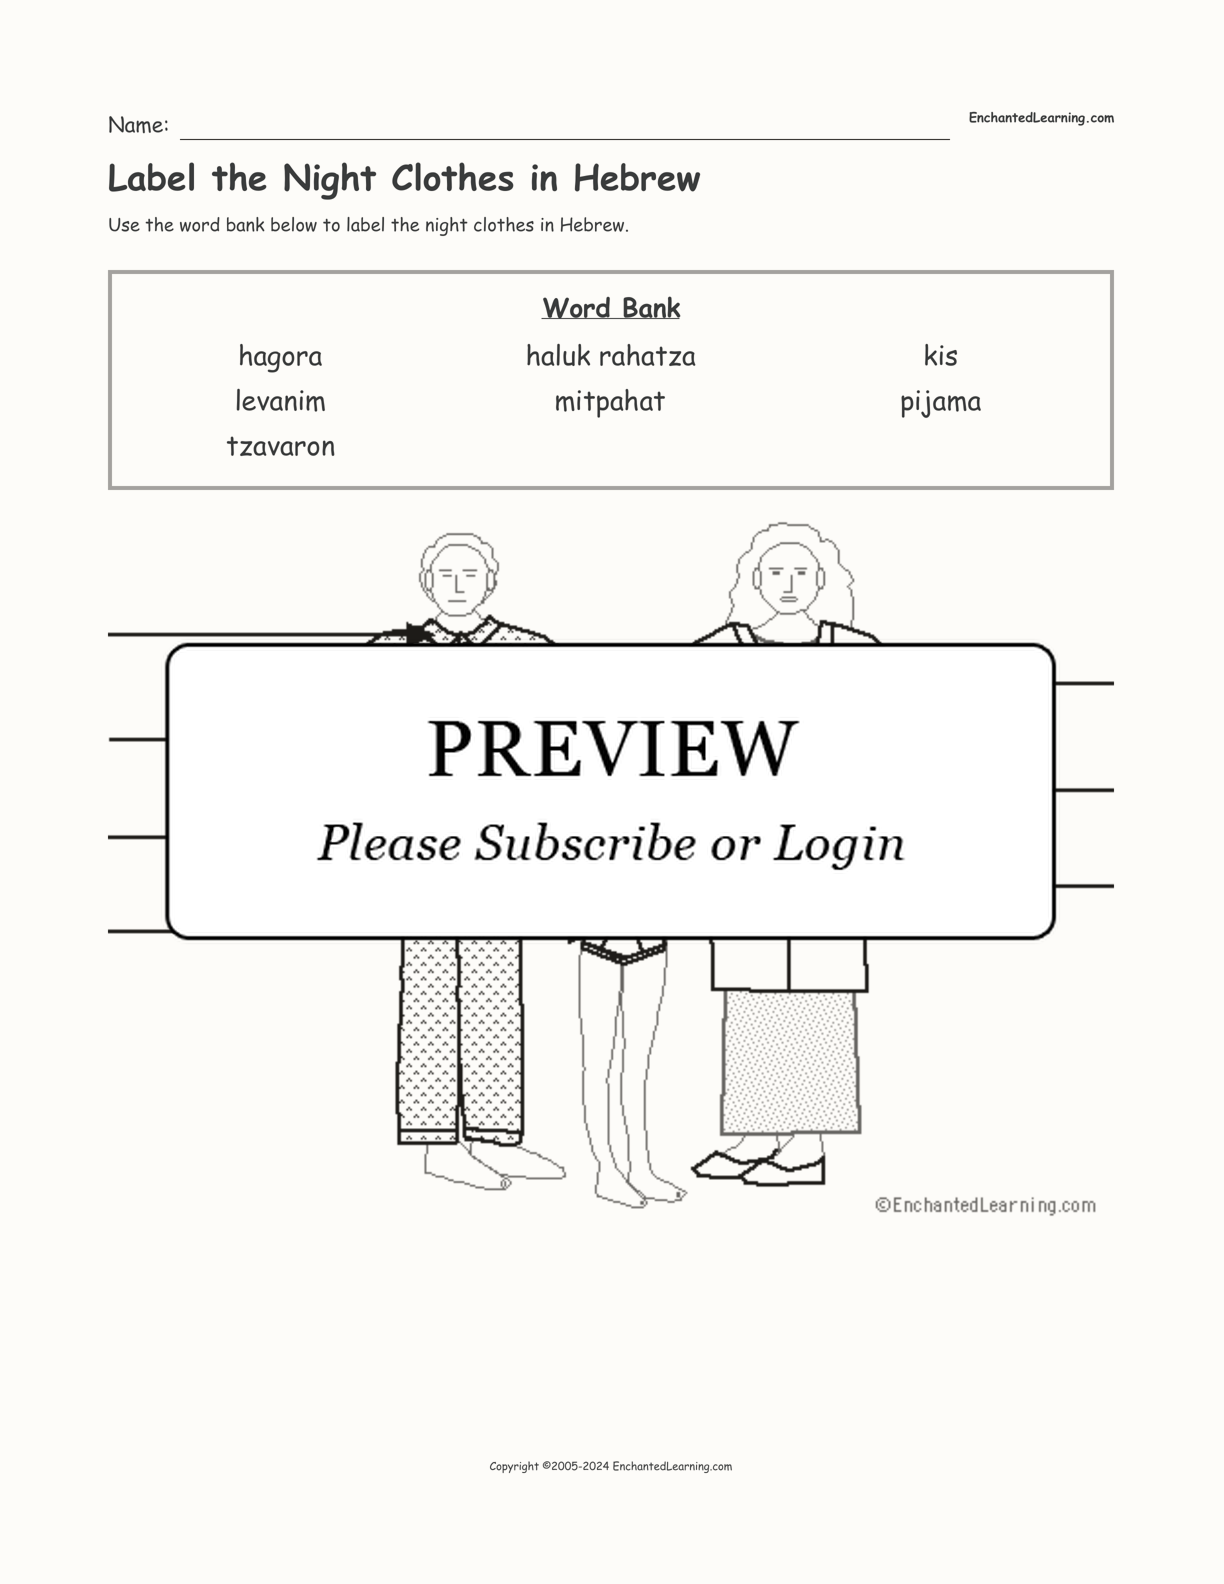 Label the Night Clothes in Hebrew interactive worksheet page 1